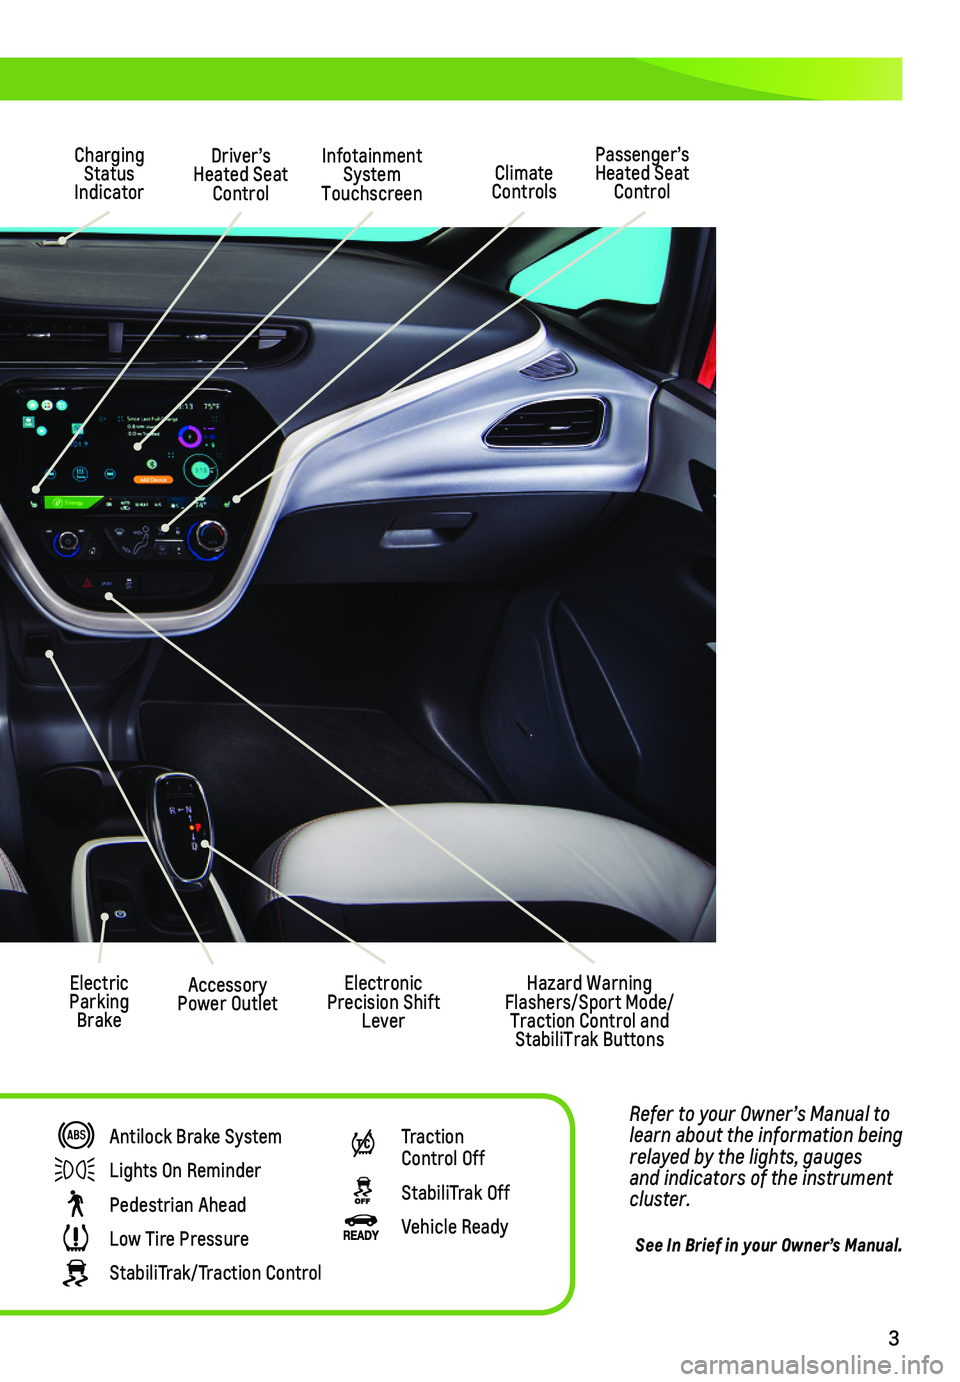 CHEVROLET BOLT EV 2019  Get To Know Guide 3
Refer to your Owner’s Manual to learn about the information being relayed by the lights, gauges and indicators of the instrument cluster.
See In Brief in your Owner’s Manual.
Driver’s Heated S